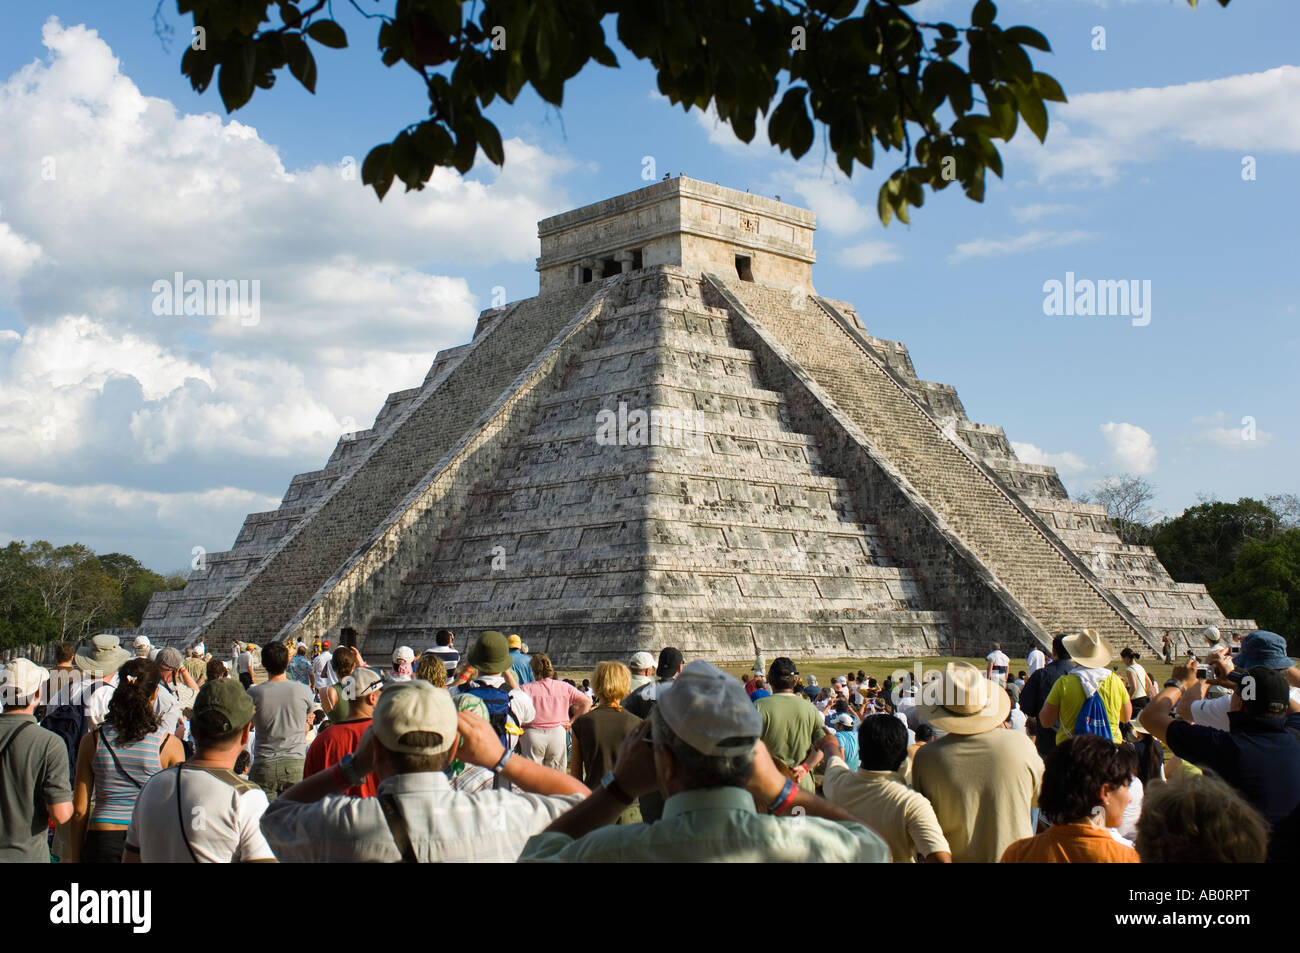 Giant serpent shadow cast down the pyramid during equinox Stock Photo